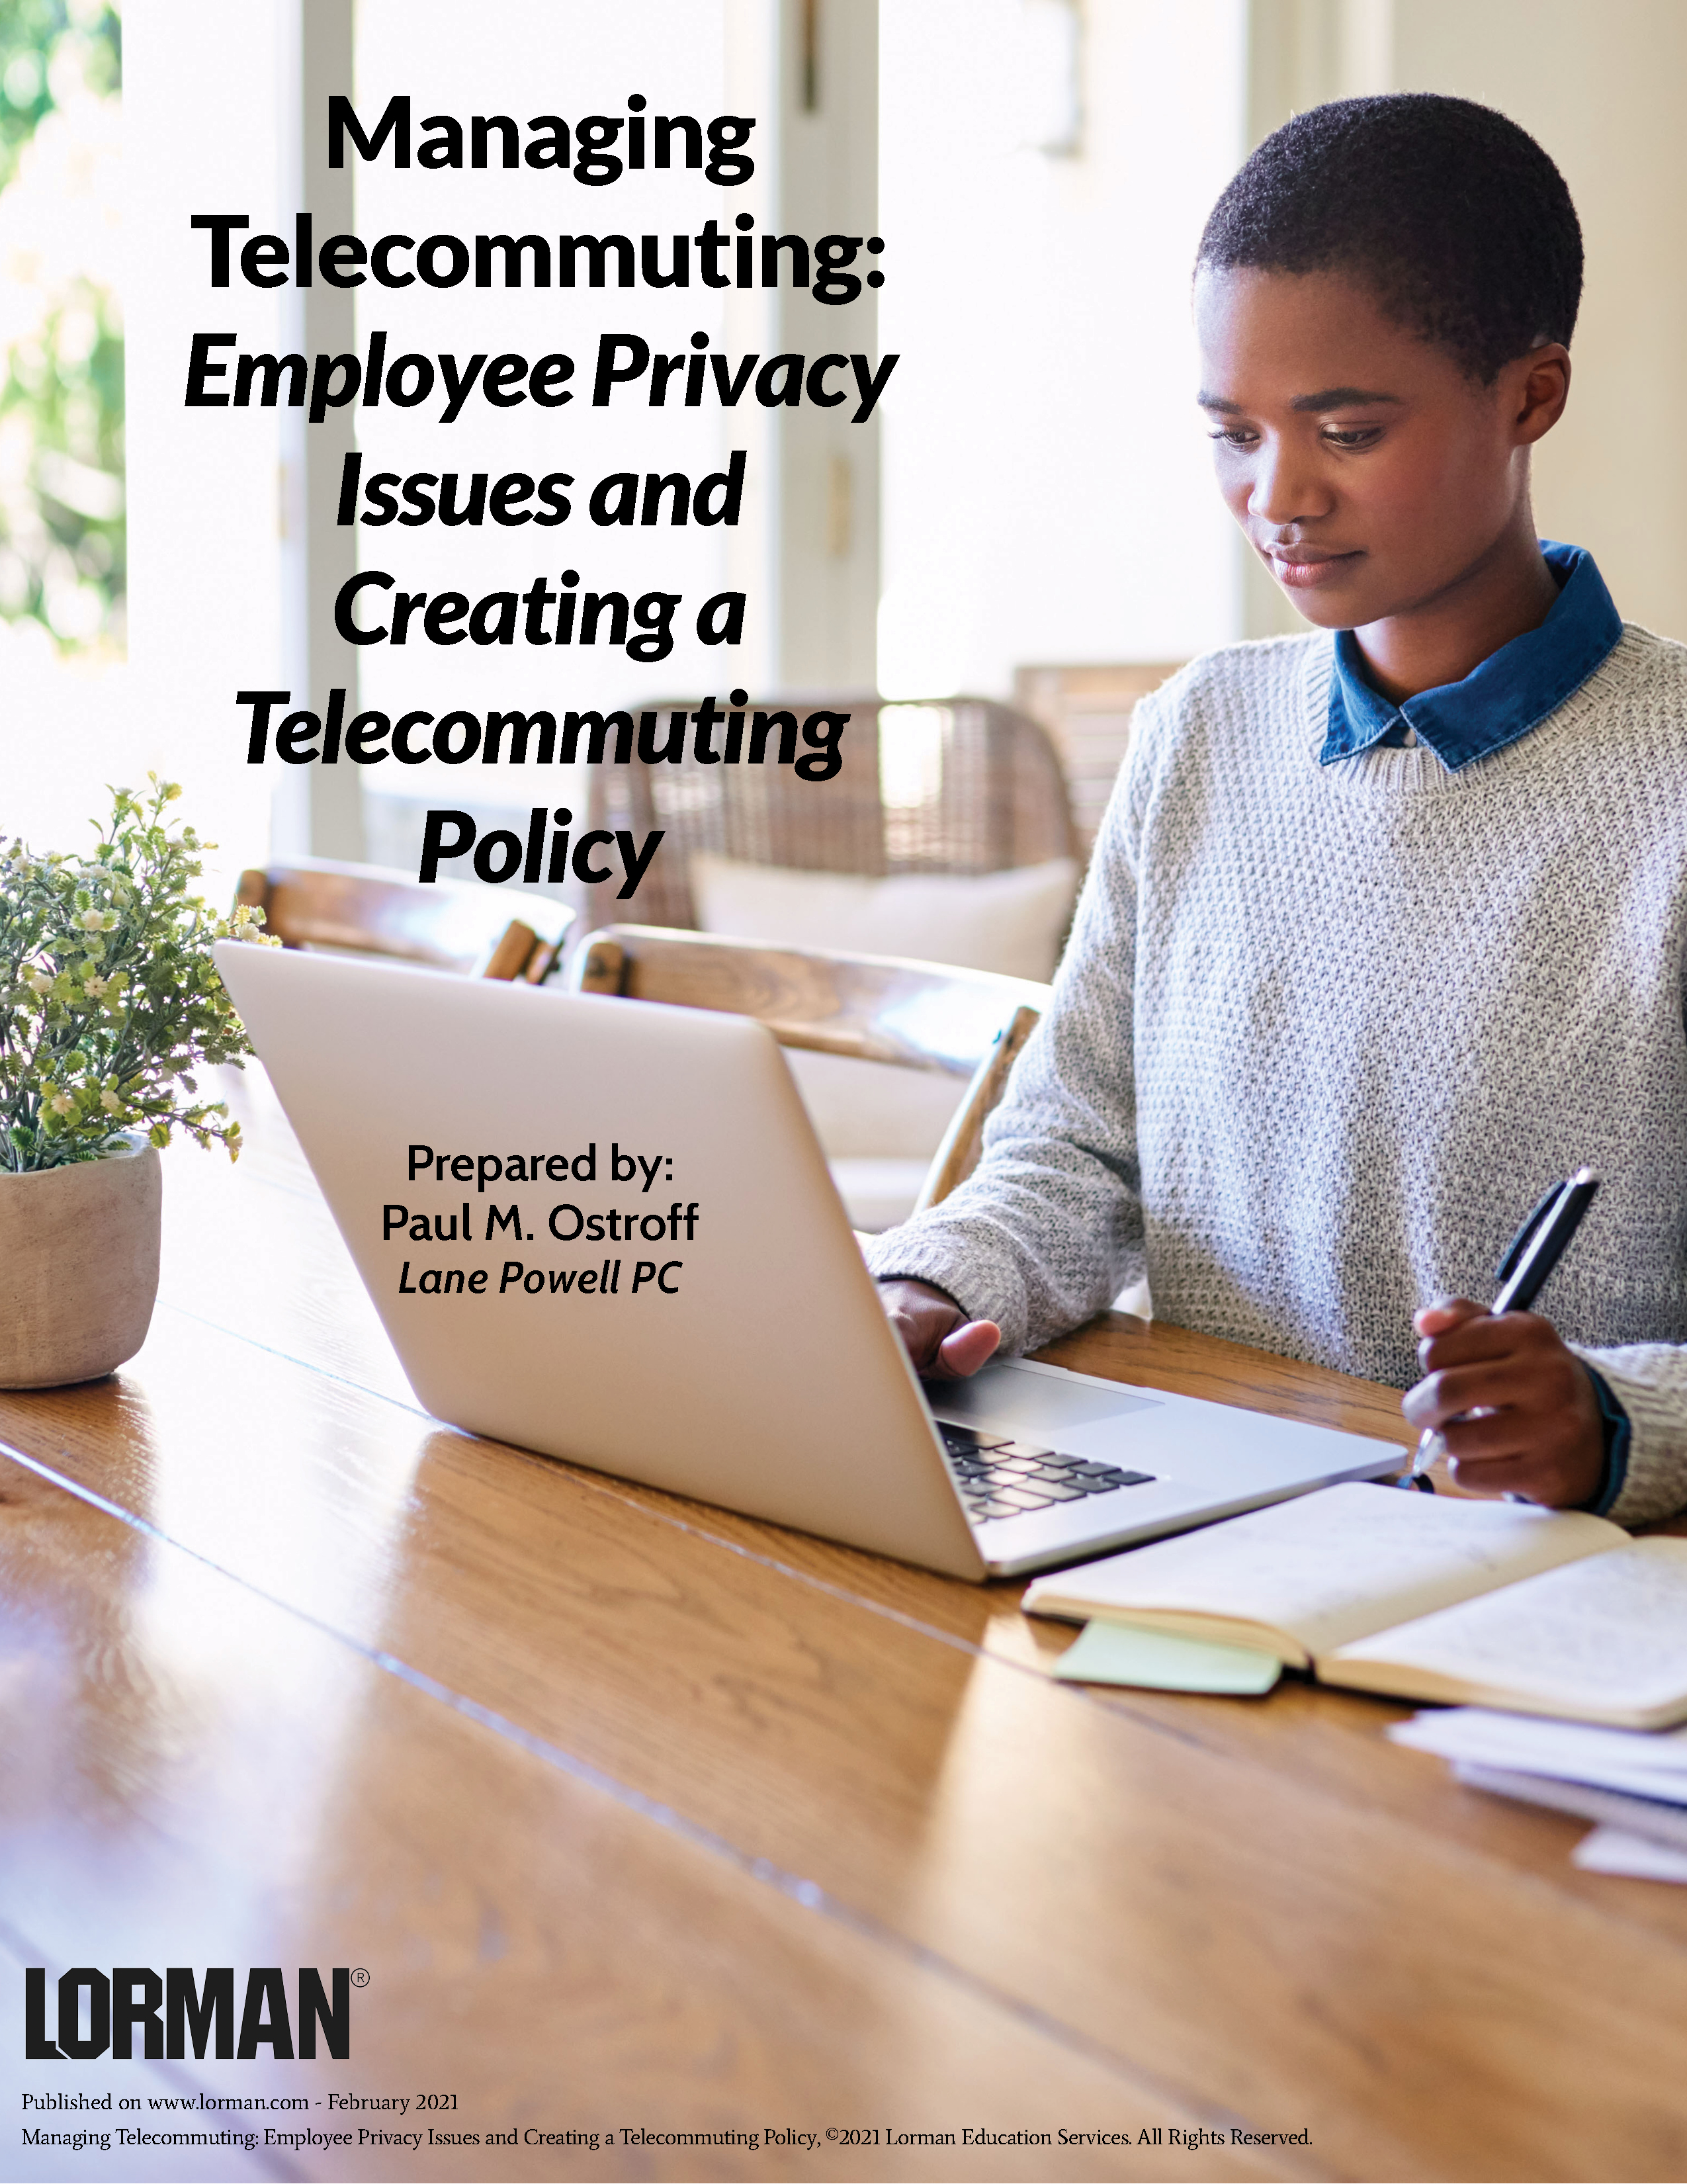 Managing Telecommuting: Employee Privacy Issues and Creating a Telecommuting Policy